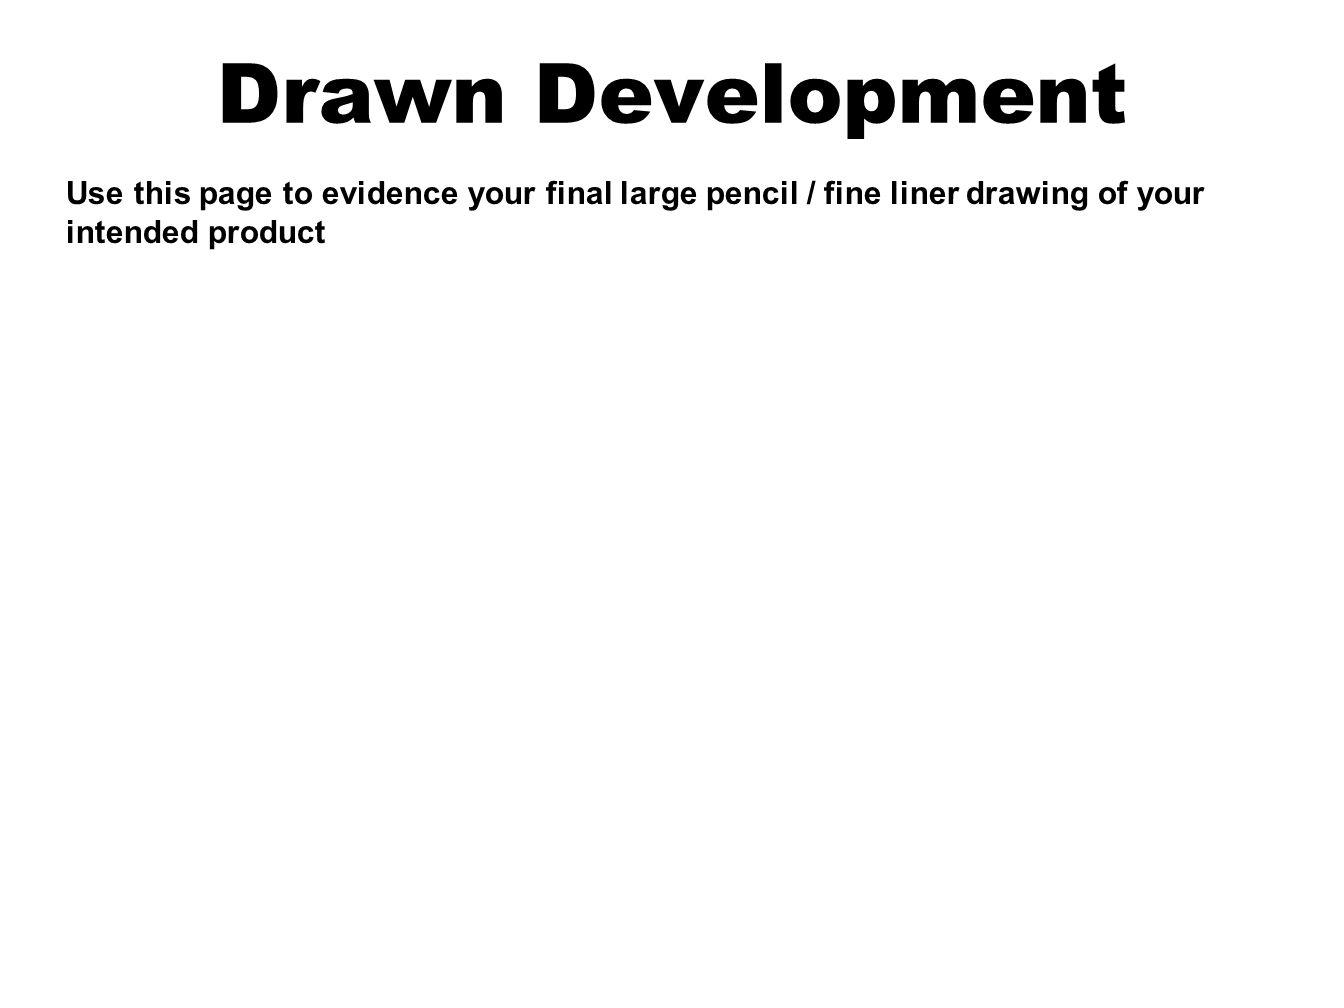 Drawn Development Use this page to evidence your final large pencil / fine liner drawing of your intended product